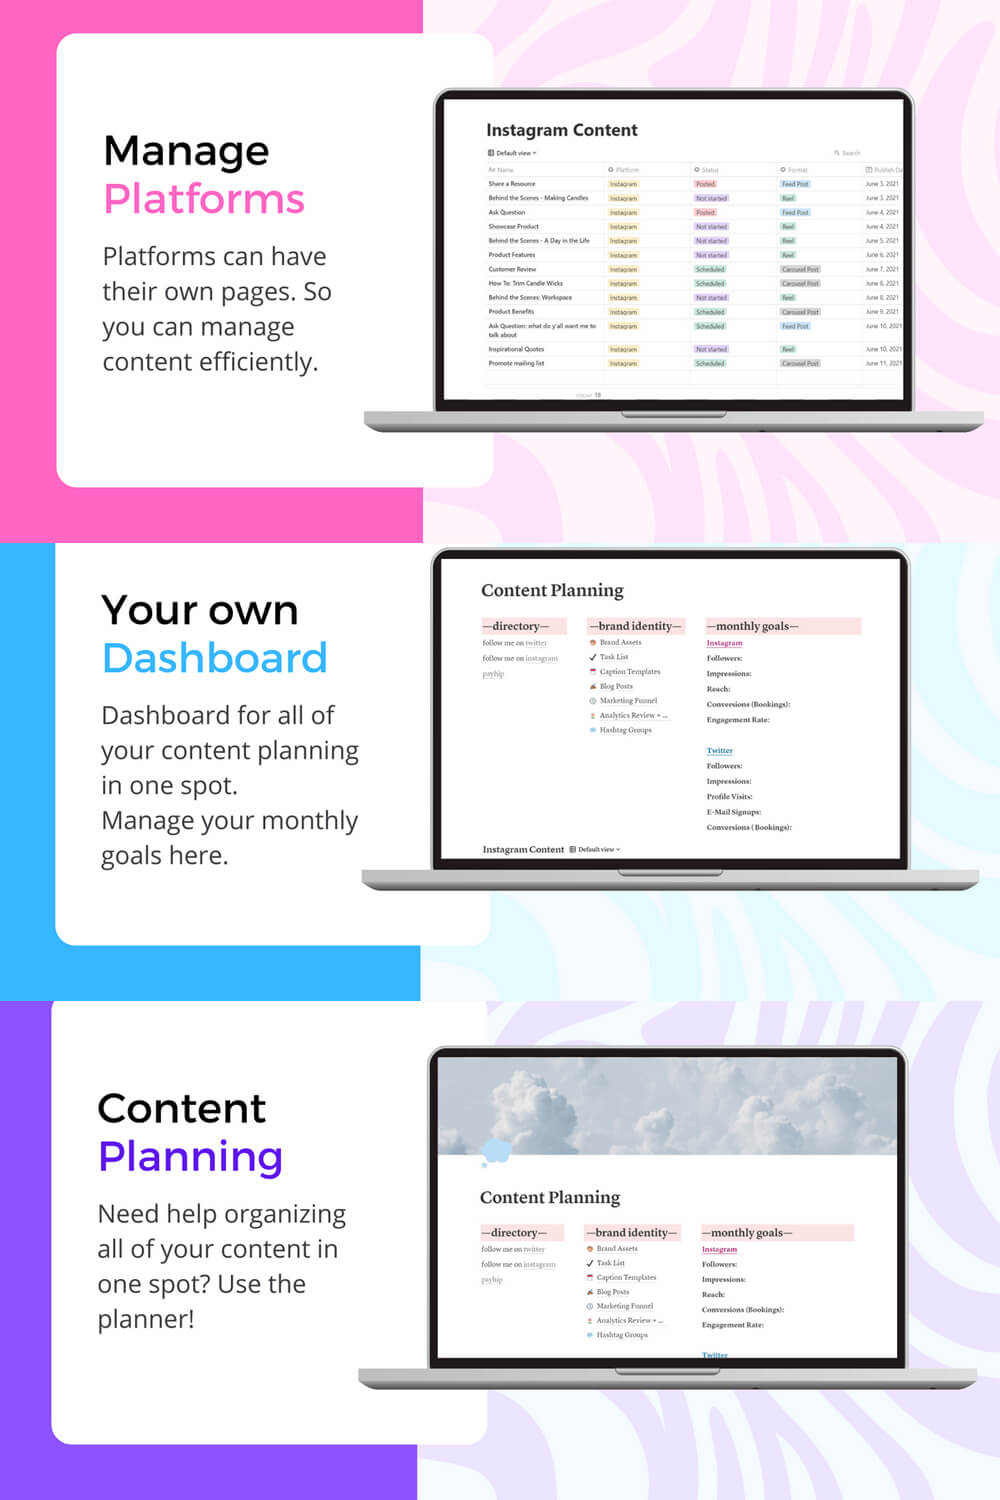 Post Planning Notion Template consist of manage platforms, own dashboard, content planning.